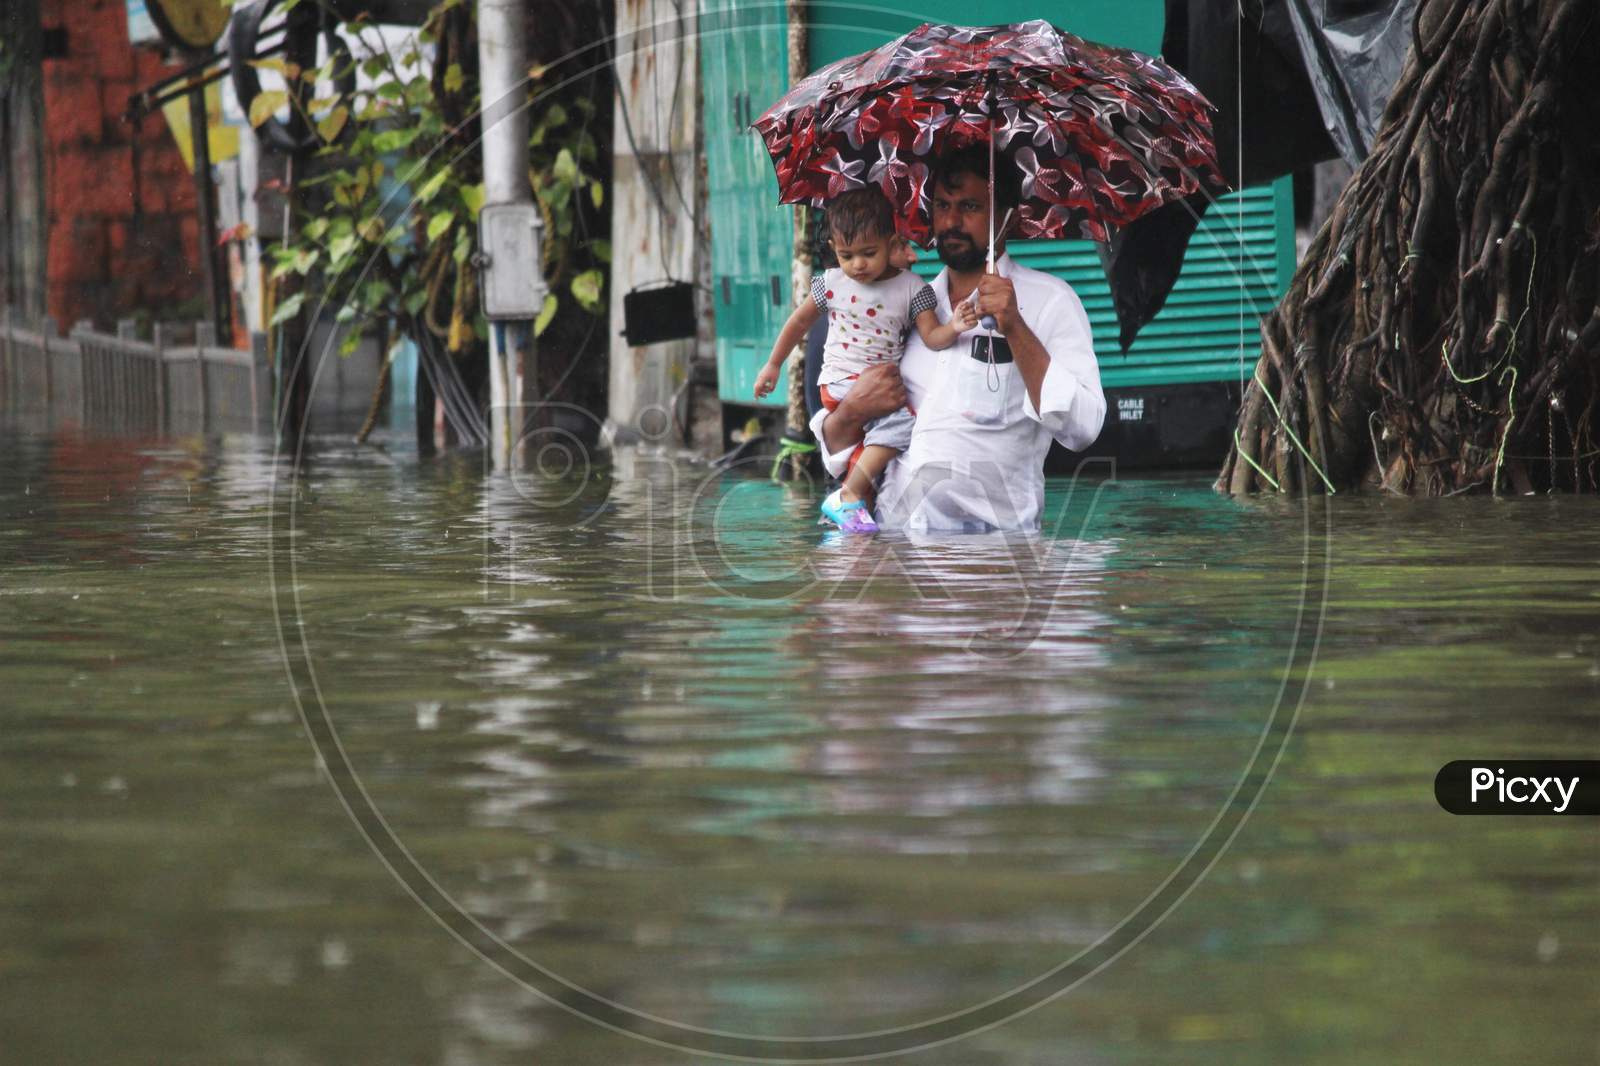 A man carries a kid in his hand and walks a waterlogged road during rains, in Mumbai, India on August 4, 2020.